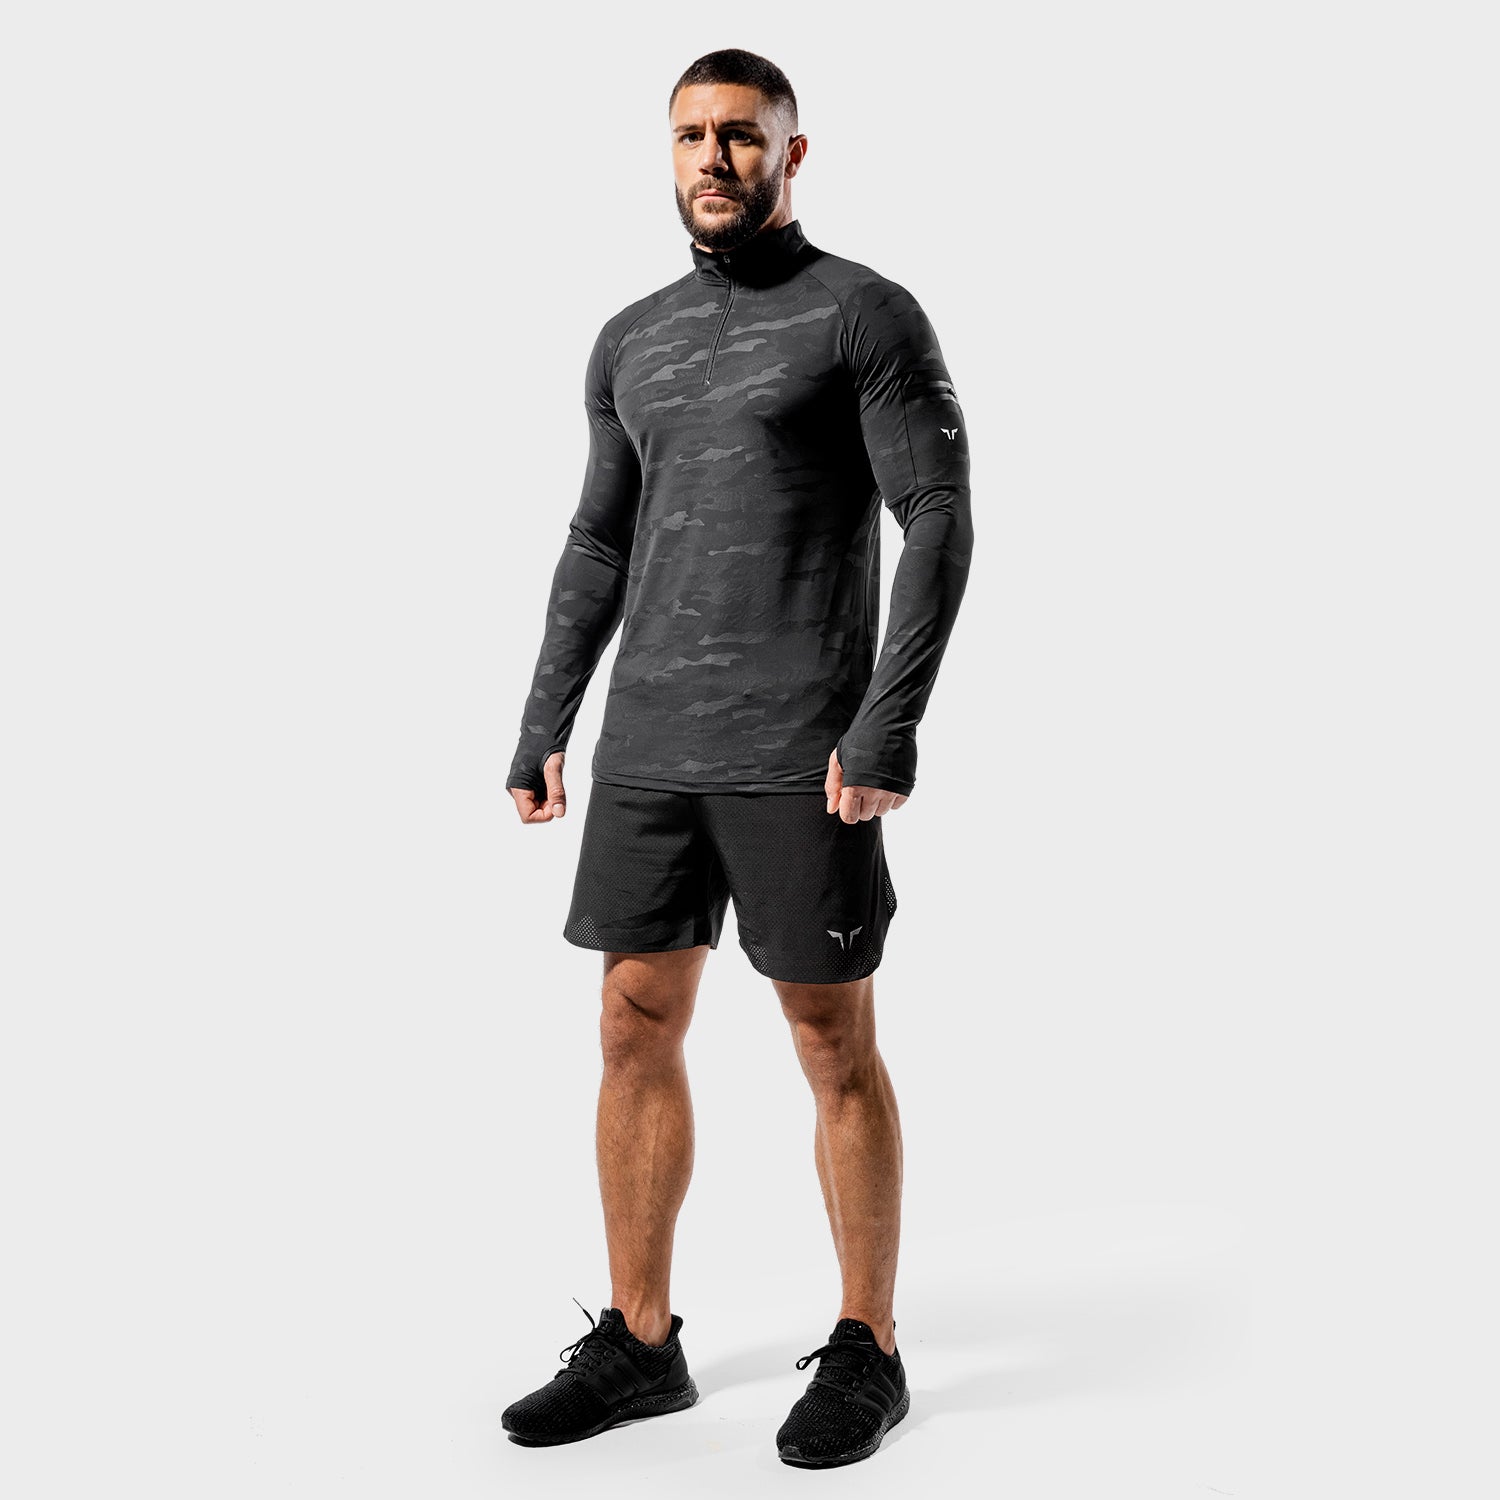 squatwolf-running-tops-for-men-core-running-top-black-camo-long-sleeves-gym-wear